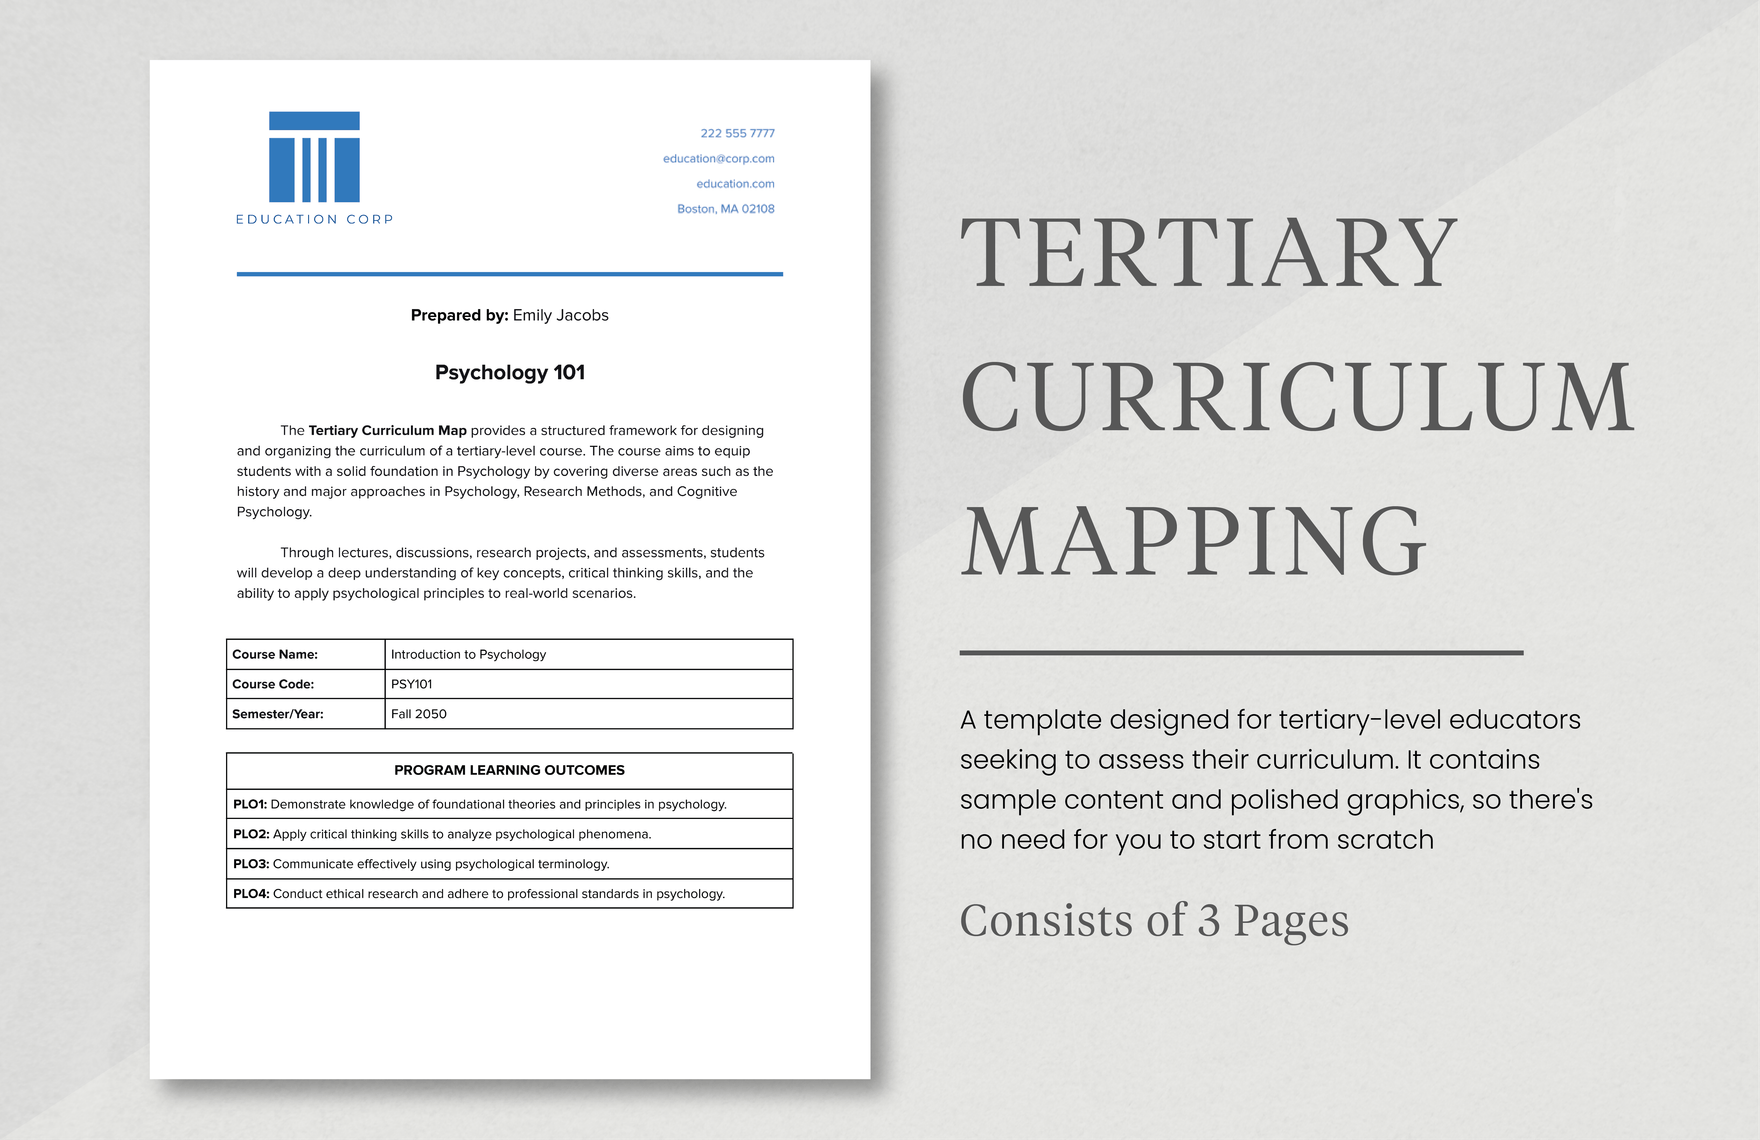 Tertiary Curriculum Mapping Template in Word, Google Docs